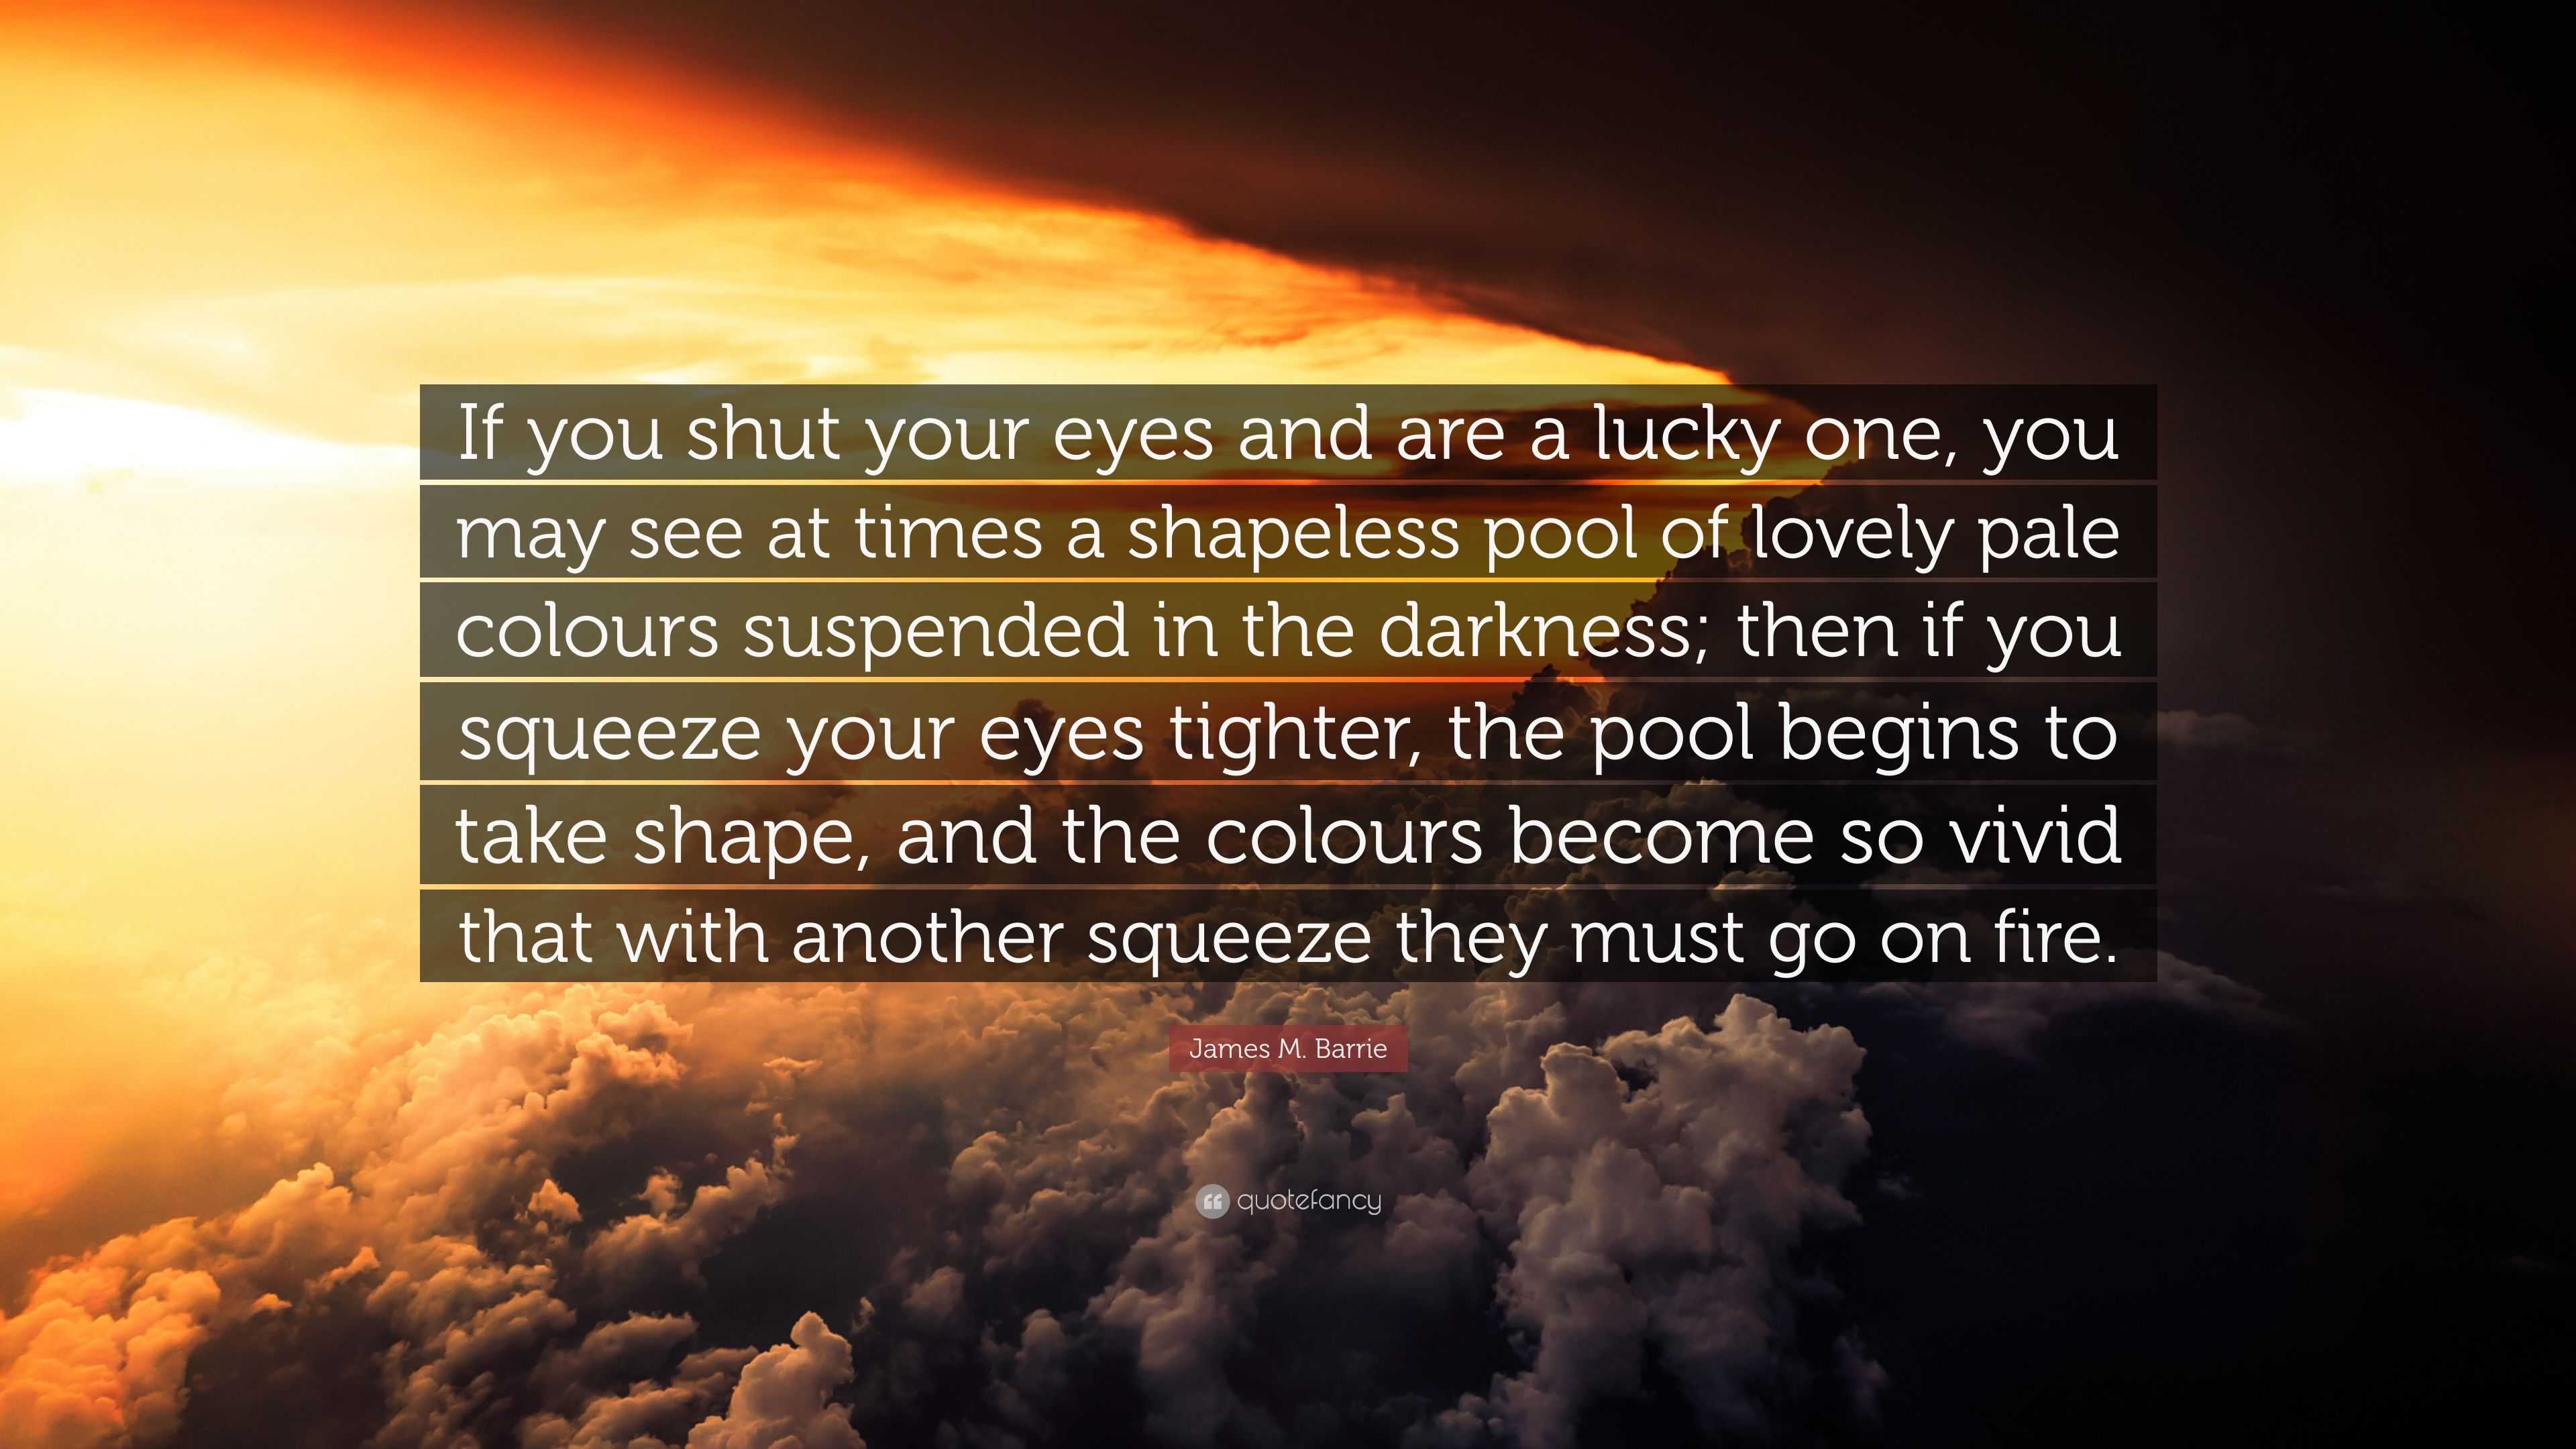 James M. Barrie Quote: “If you shut your eyes and are a lucky one, you may  see at times a shapeless pool of lovely pale colours suspended in the...”